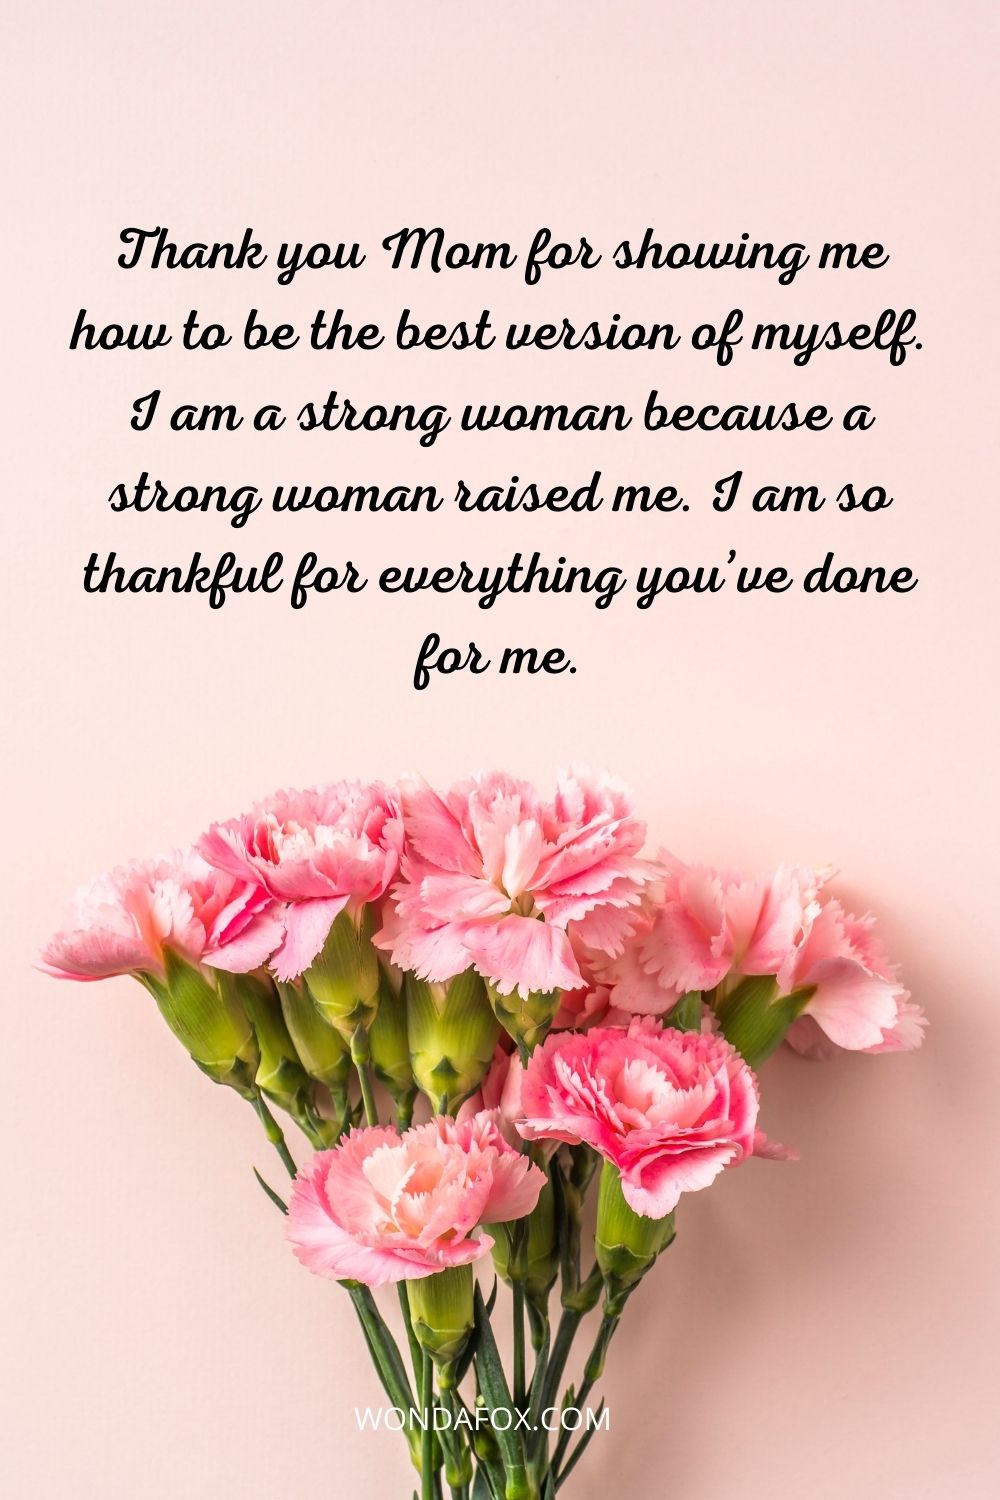 Thank you Mom for showing me how to be the best version of myself. I am a strong woman because a strong woman raised me. I am so thankful for everything you’ve done for me.